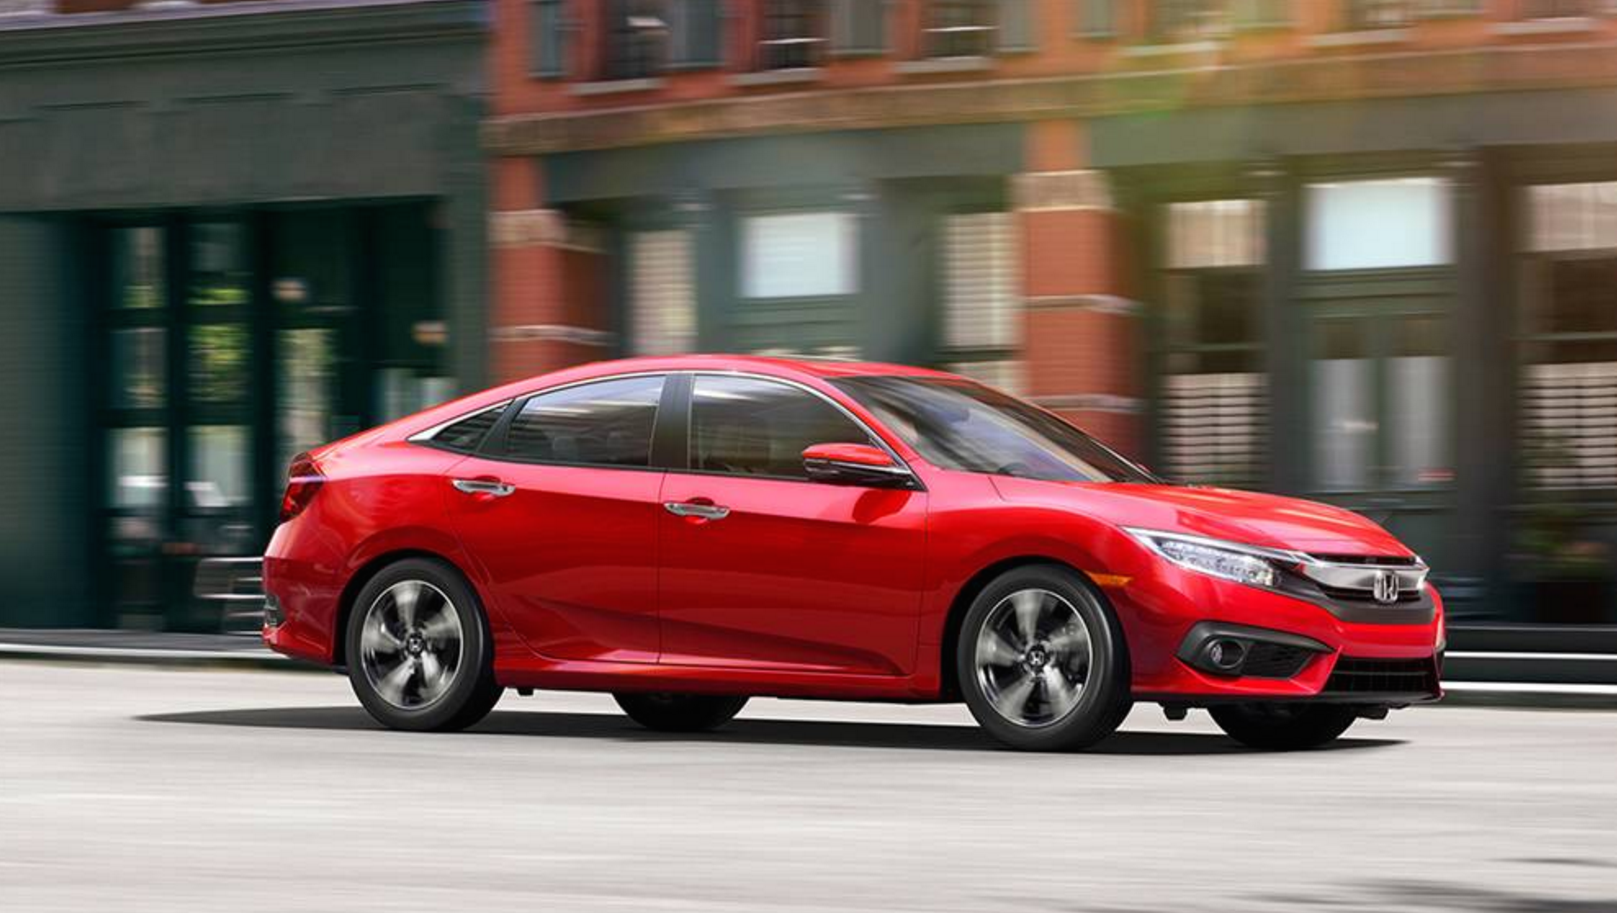 Honda Officially Recalls 2016 Civics Over Engine Failures, Continues Halt To New Sales